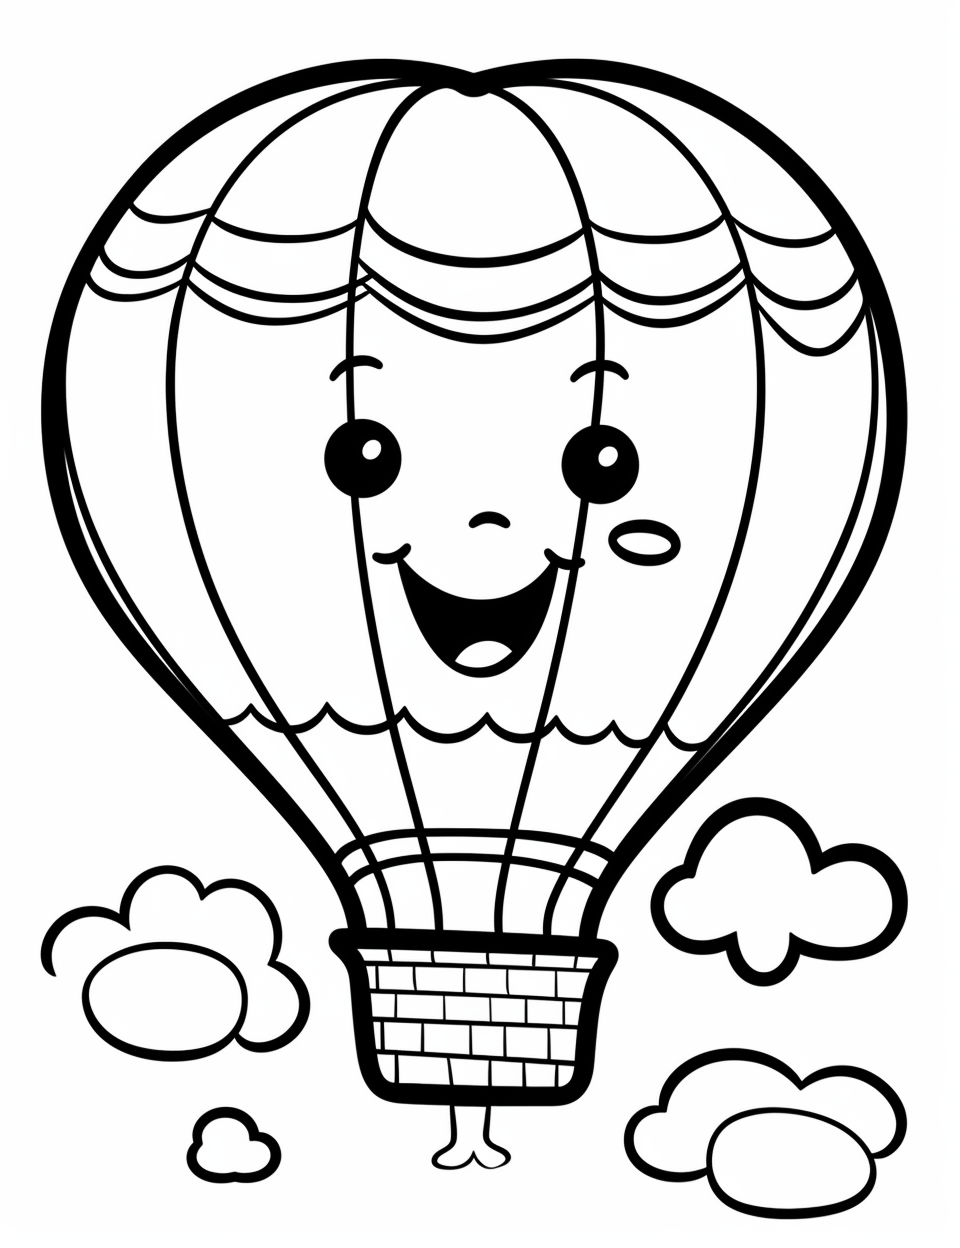 Kawaii hot air balloon floating in the sky with a happy passenger for simple coloring pageline art thick lines black and whiteclipart illustration on white backgrounddetaileddetails